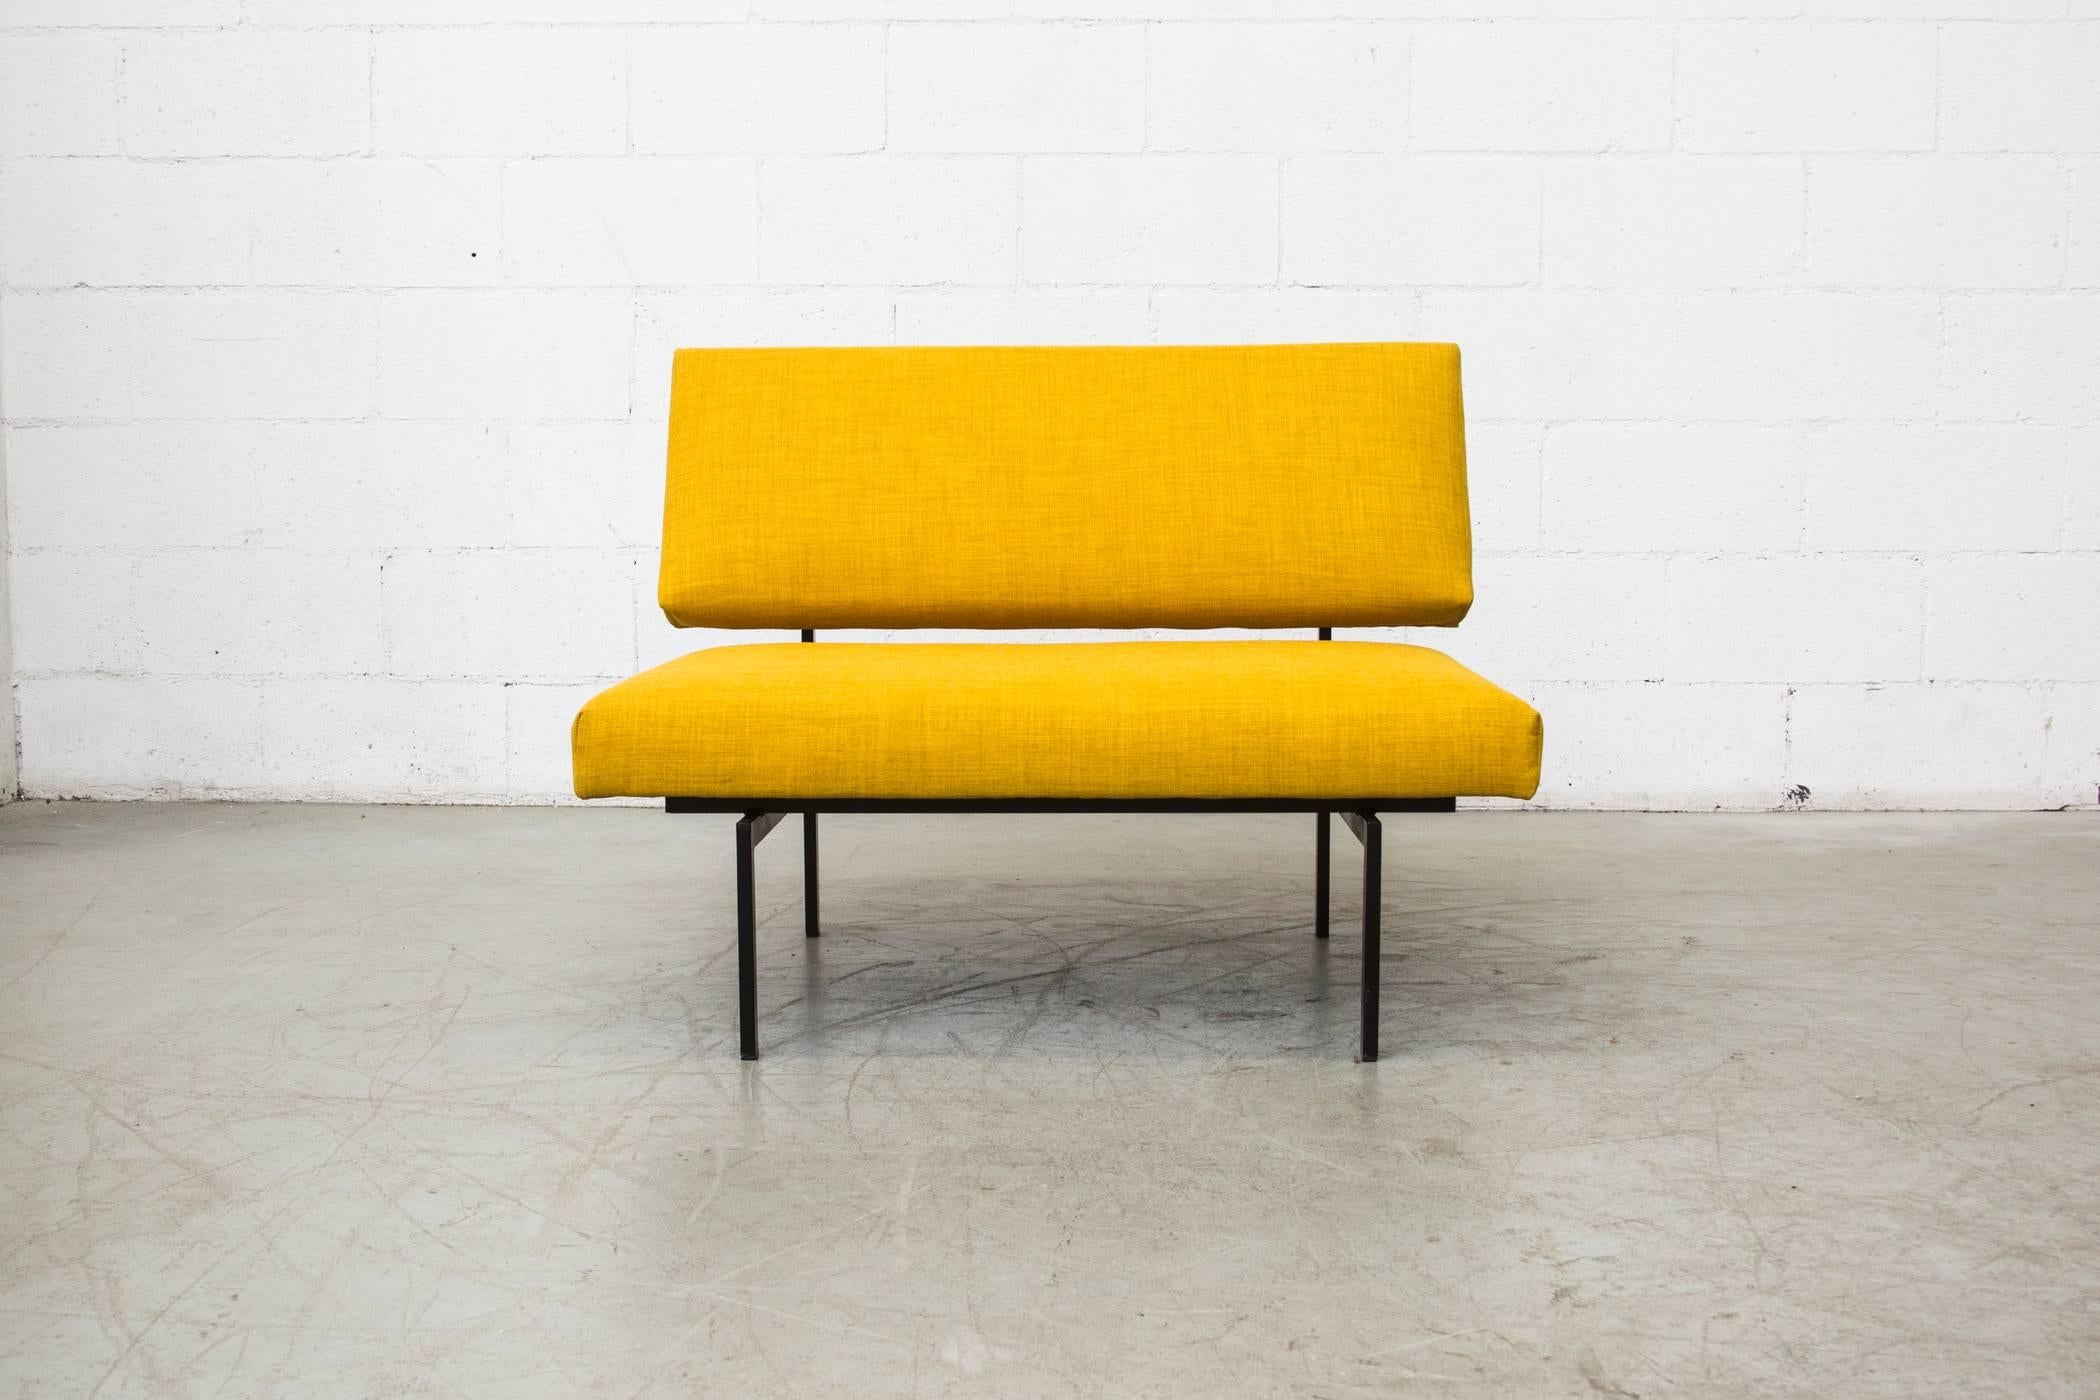 Very rare Coen de Vries loveseat newly upholstered in sunshine yellow. Black enameled metal frame in original condition with visible signs of wear.